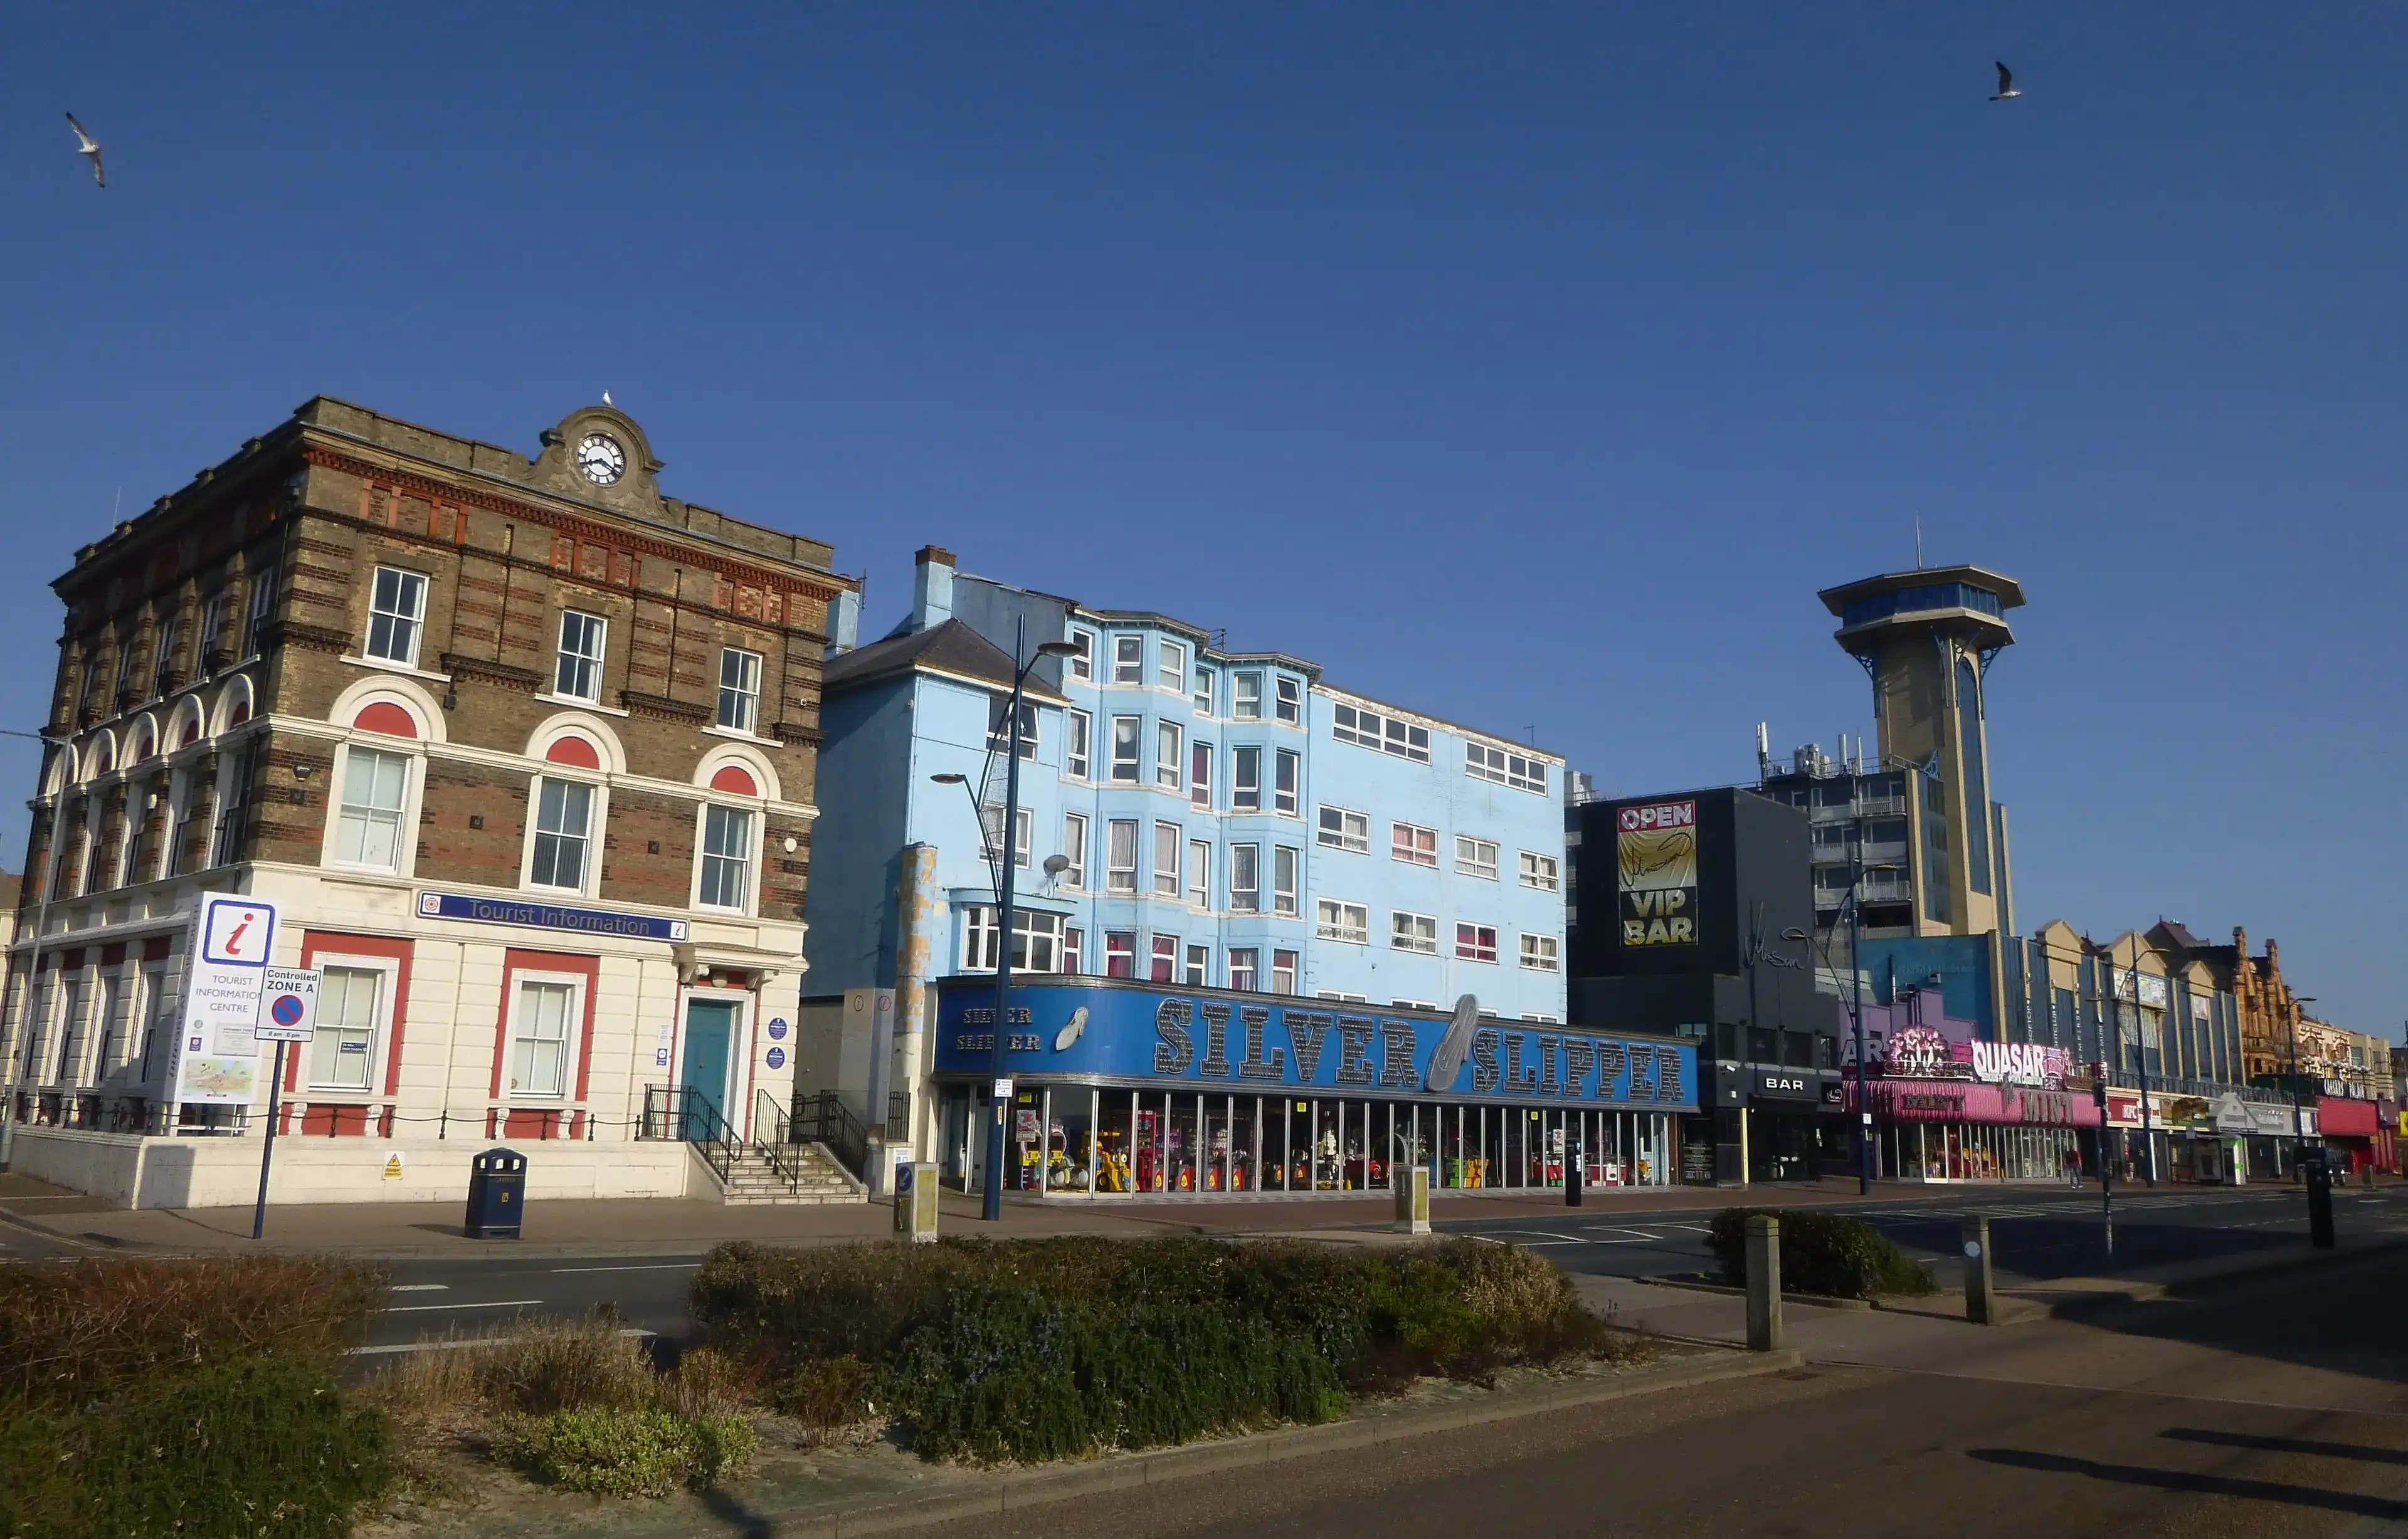 Best Great Yarmouth hotels. Cheap hotels in Great Yarmouth, United Kingdom